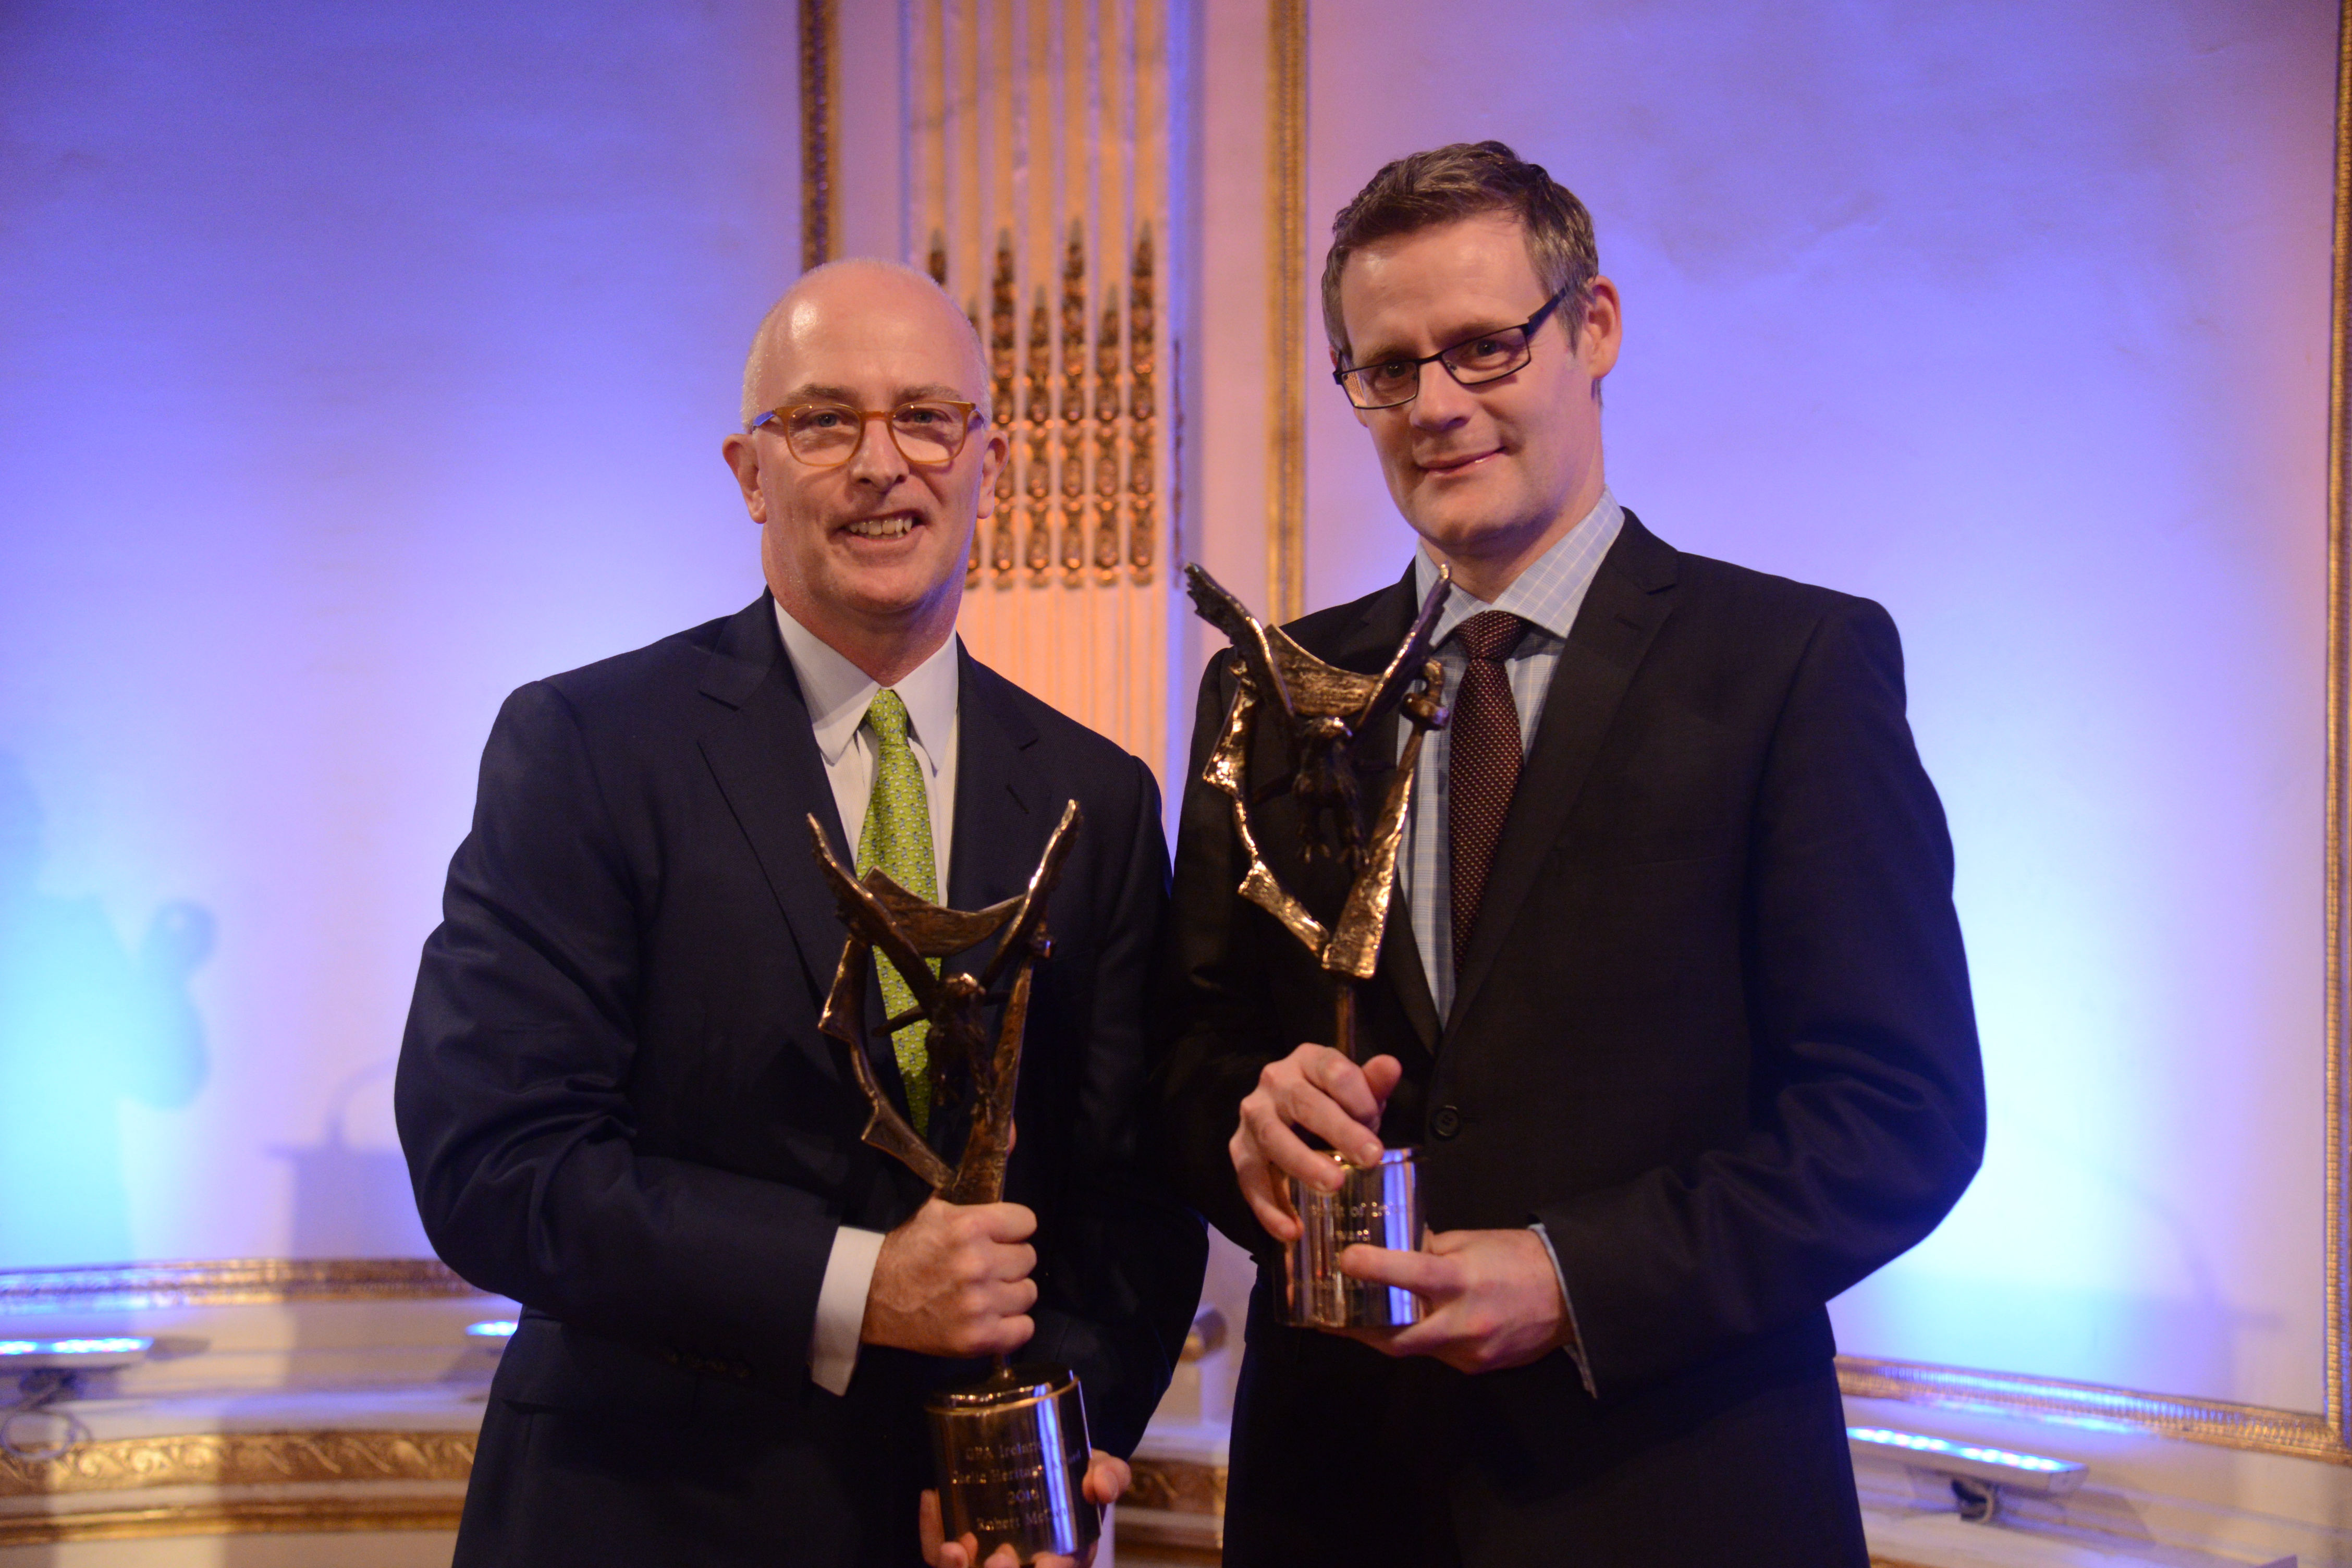 Bob McCann of UBS and Stephen Kavanagh of Aer Lingus were honored.